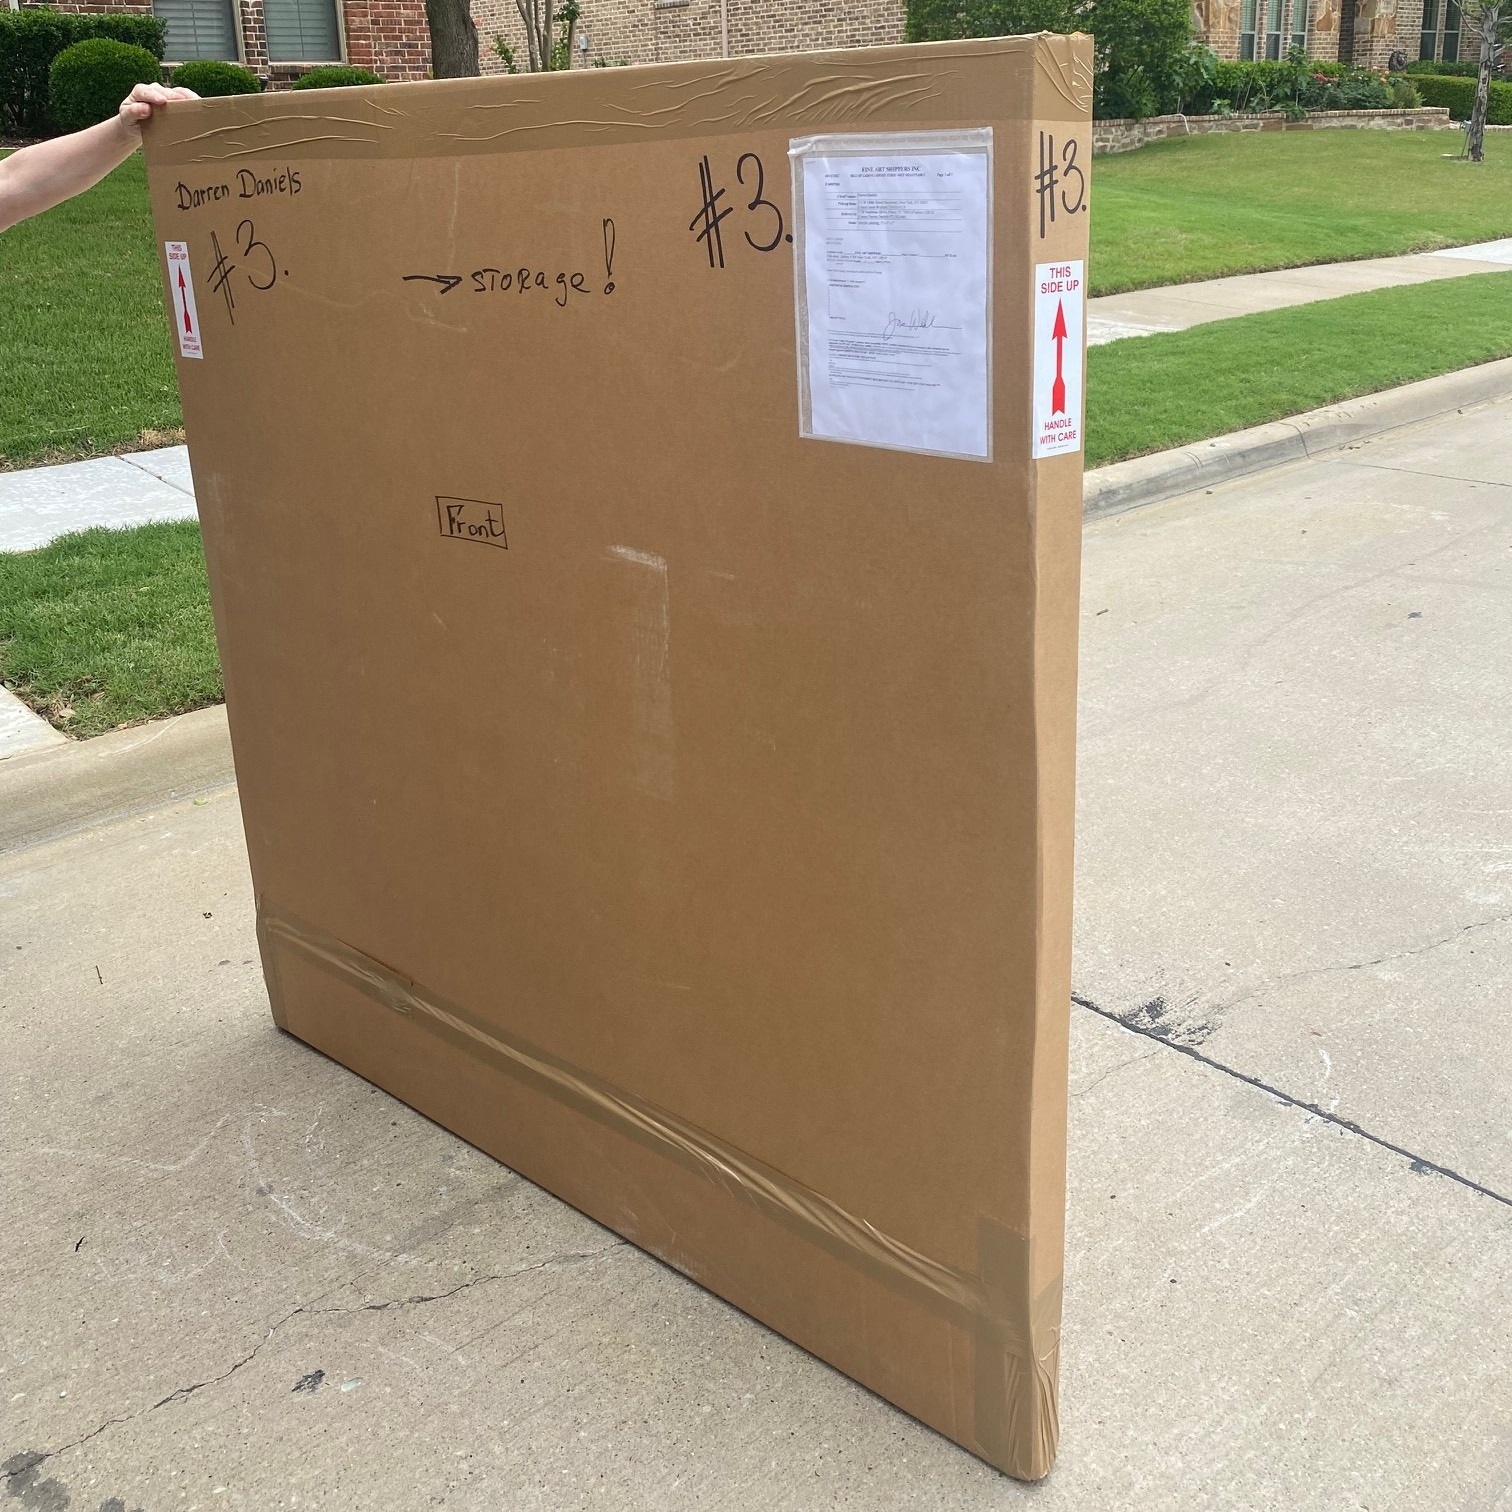 Fine Art Shippers Offers Artwork Courier Services to Dallas, TX